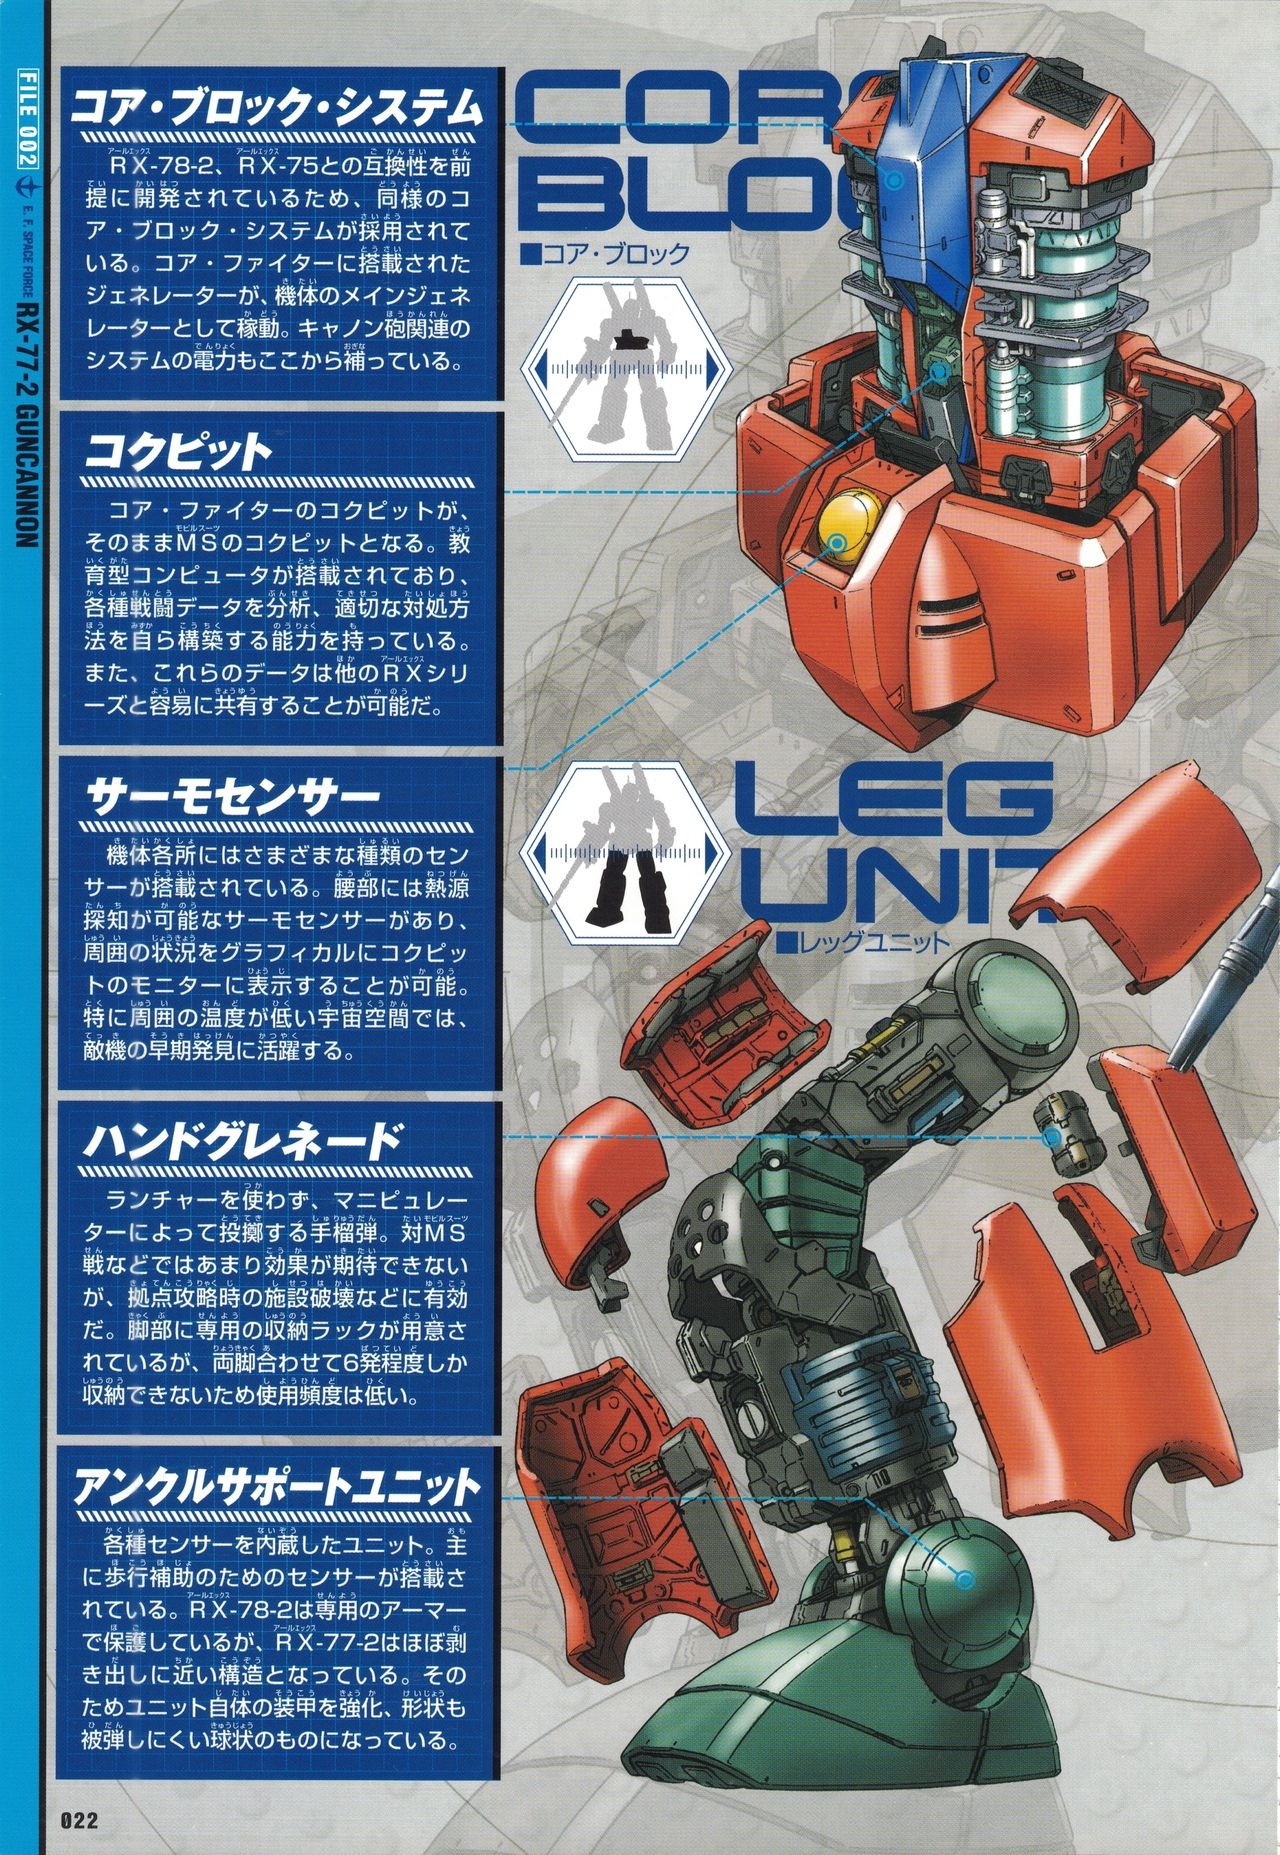 Mobile Suit Gundam - New Cross-Section Book - One Year War Edition 24